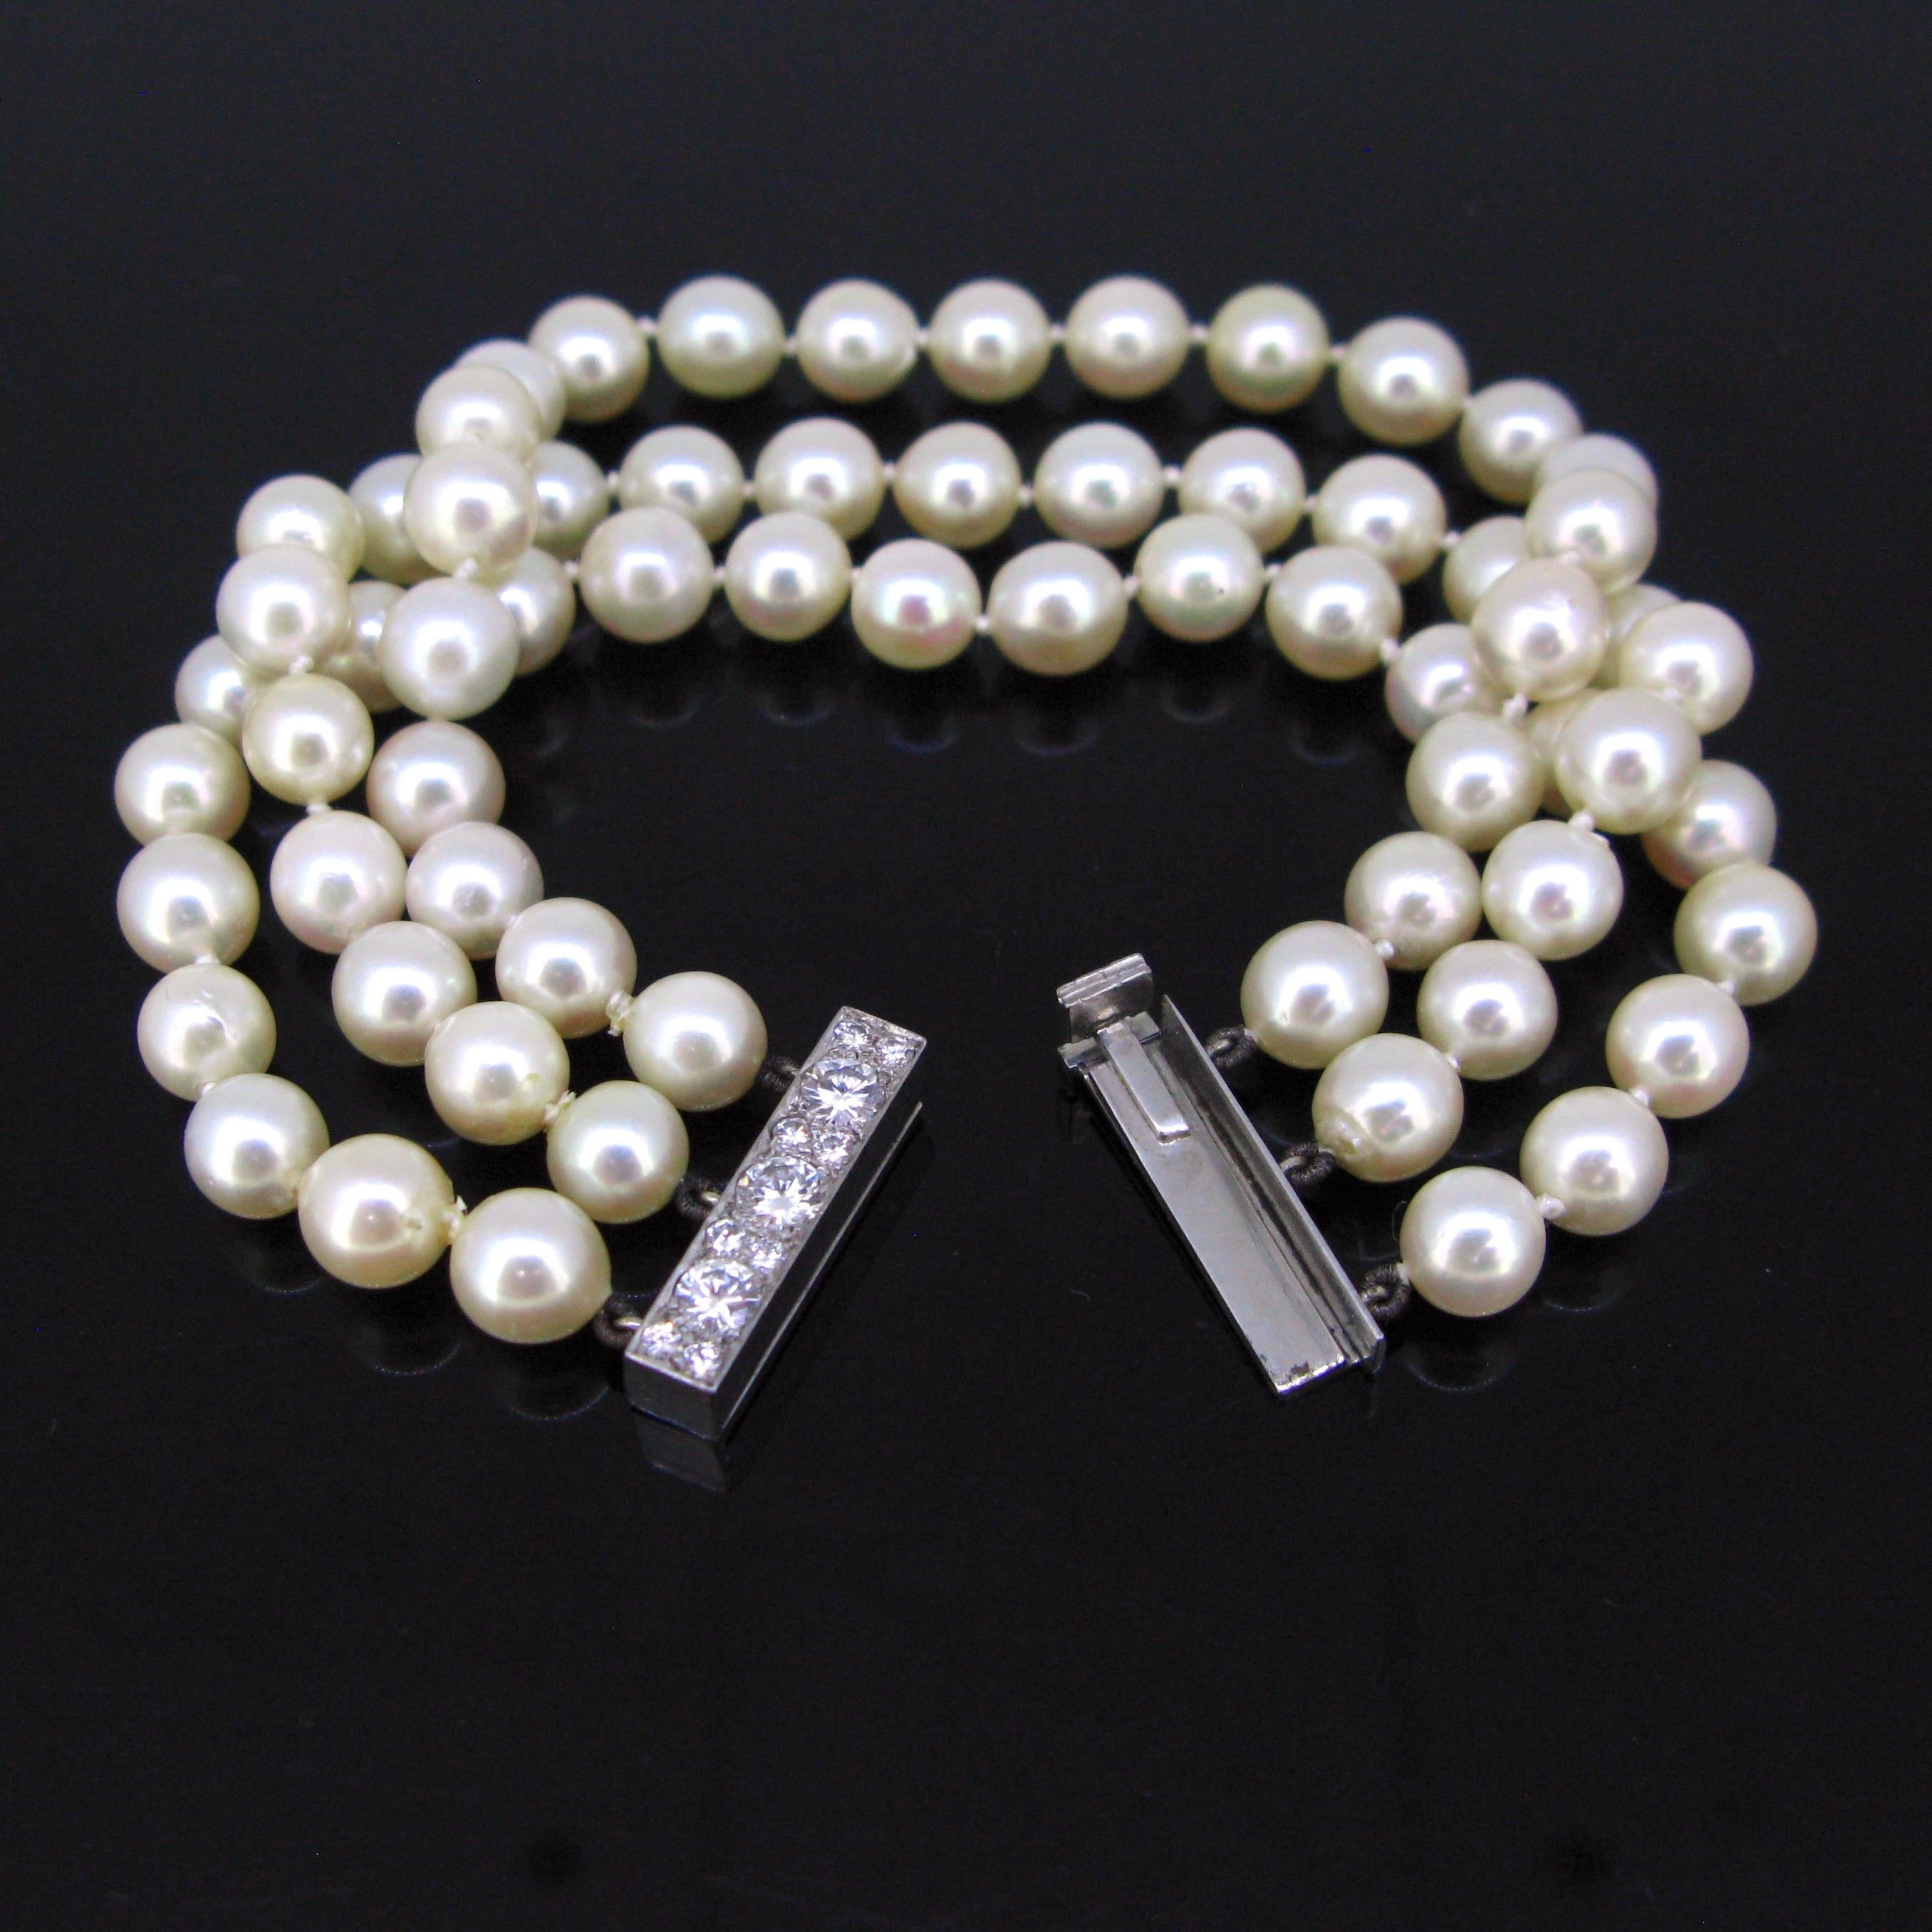 This bracelet features 3 rows of cultured pearls. They have nice ivory, beige and pink undertones. The clasp is made in 18kt white gold and adorned with brilliant cut diamonds. There is an approximate total carat weight of 1.20ct. It is an elegant